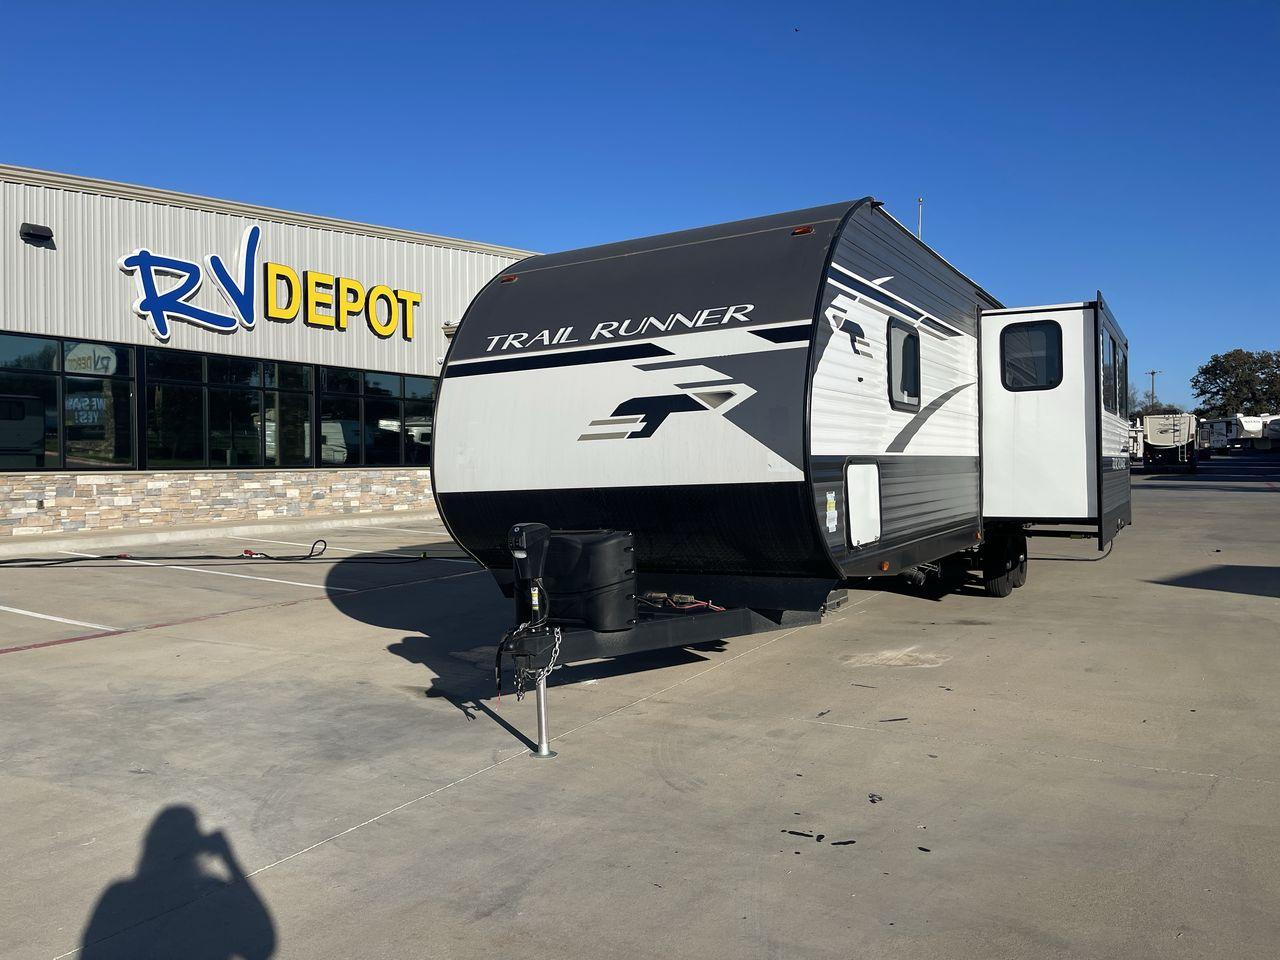 2023 HEARTLAND TRAIL RUNNER 31DB (5SFEB372XPE) , Length: 36.92 ft | Dry Weight: 7,040 lbs | GVWR: 9,642 lbs | Slides: 1 transmission, located at 4319 N Main St, Cleburne, TX, 76033, (817) 678-5133, 32.385960, -97.391212 - If you're in the market for a reliable and spacious travel trailer bunk house, look no further than this 2023 Heartland Trail Runner 31DB available at RV Depot in Cleburne, TX. With its affordable price of $37,995, this vehicle offers exceptional value for families or groups looking to embark on unf - Photo #0